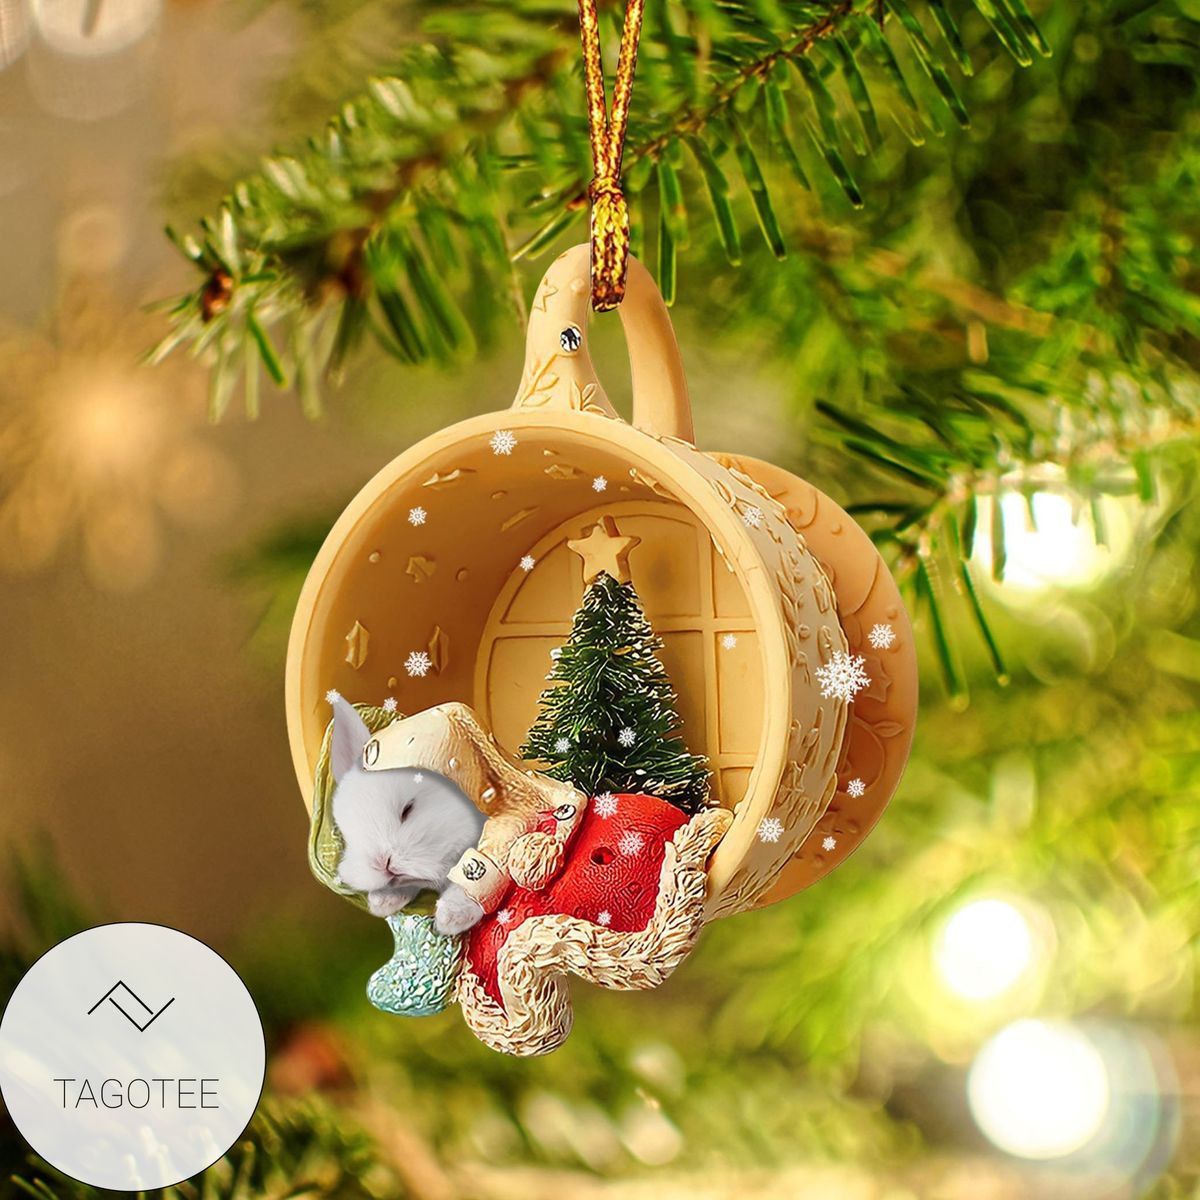 Rabbit Sleeping In A Tiny Cup Christmas Holiday Ornament